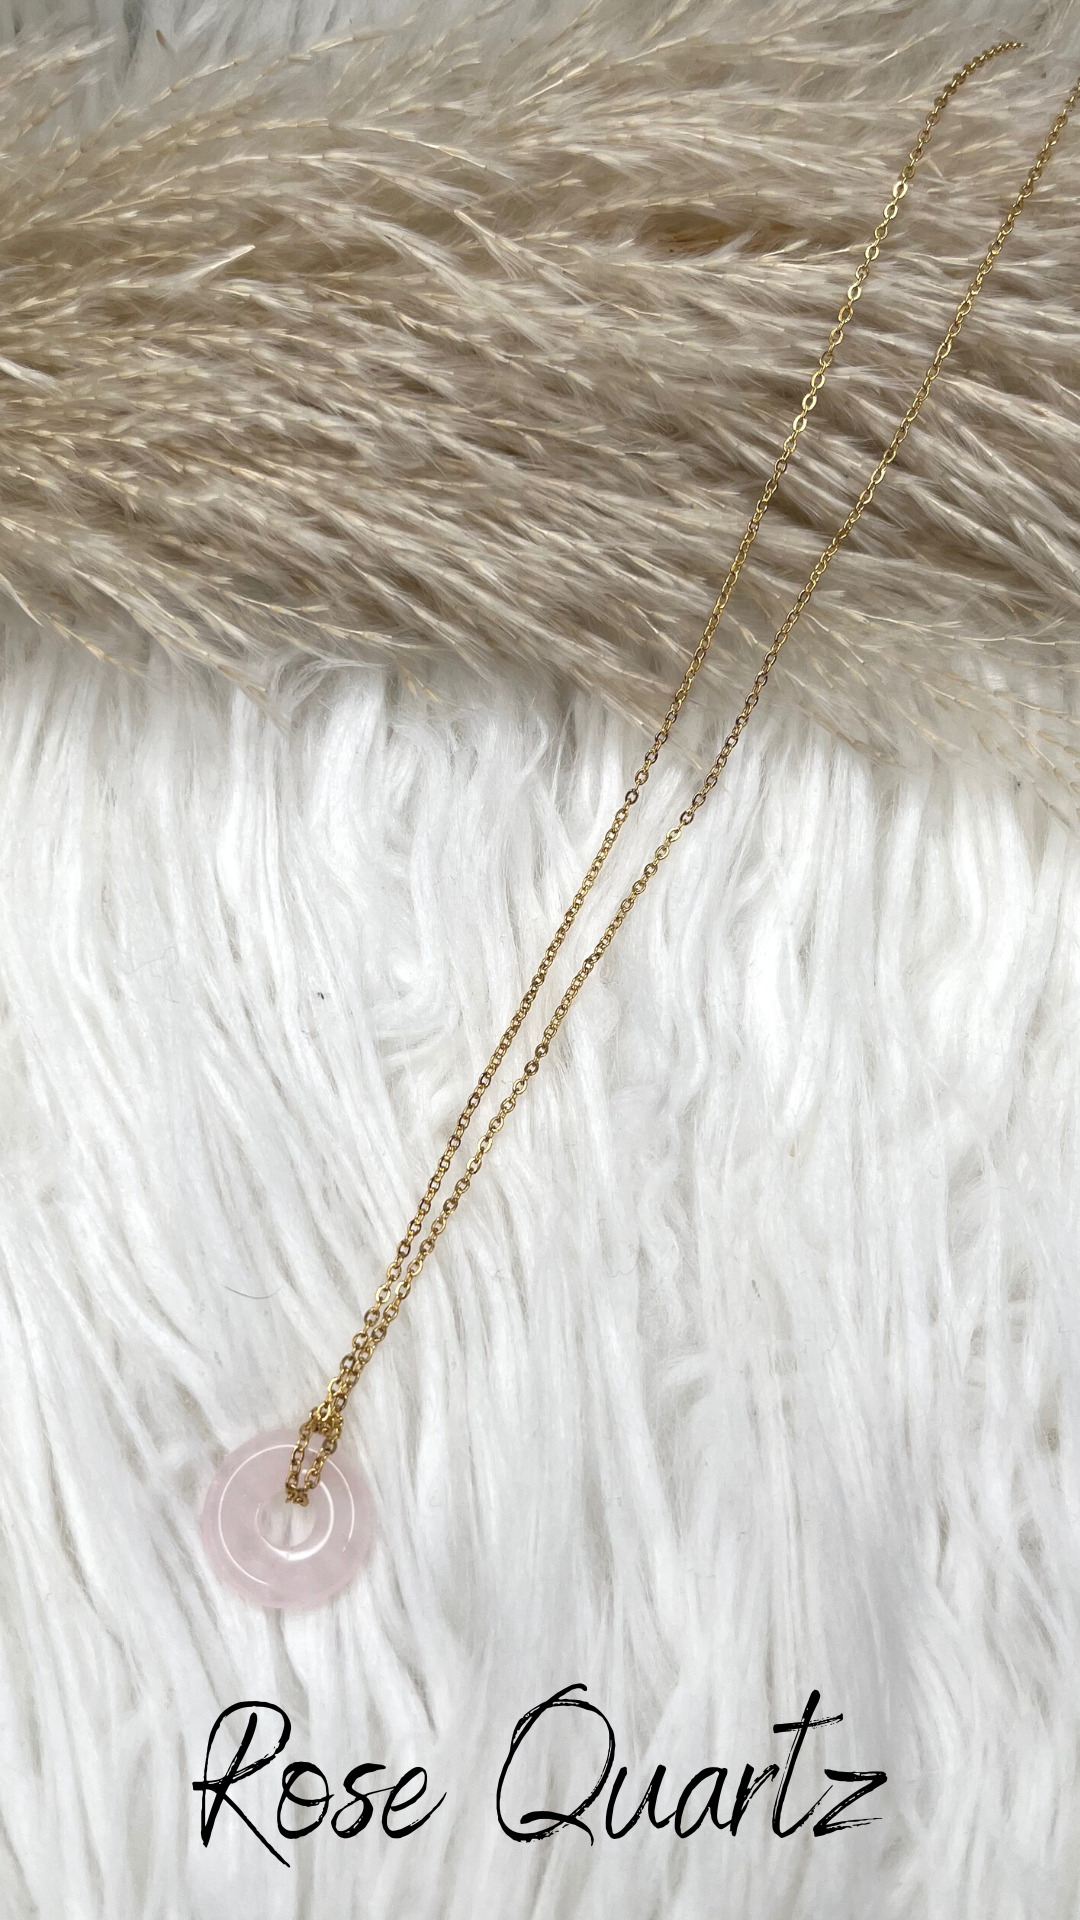 The Torus Necklace - Natural Rose Quartz crystal with 18k gold-plated, Stainless-steel chain